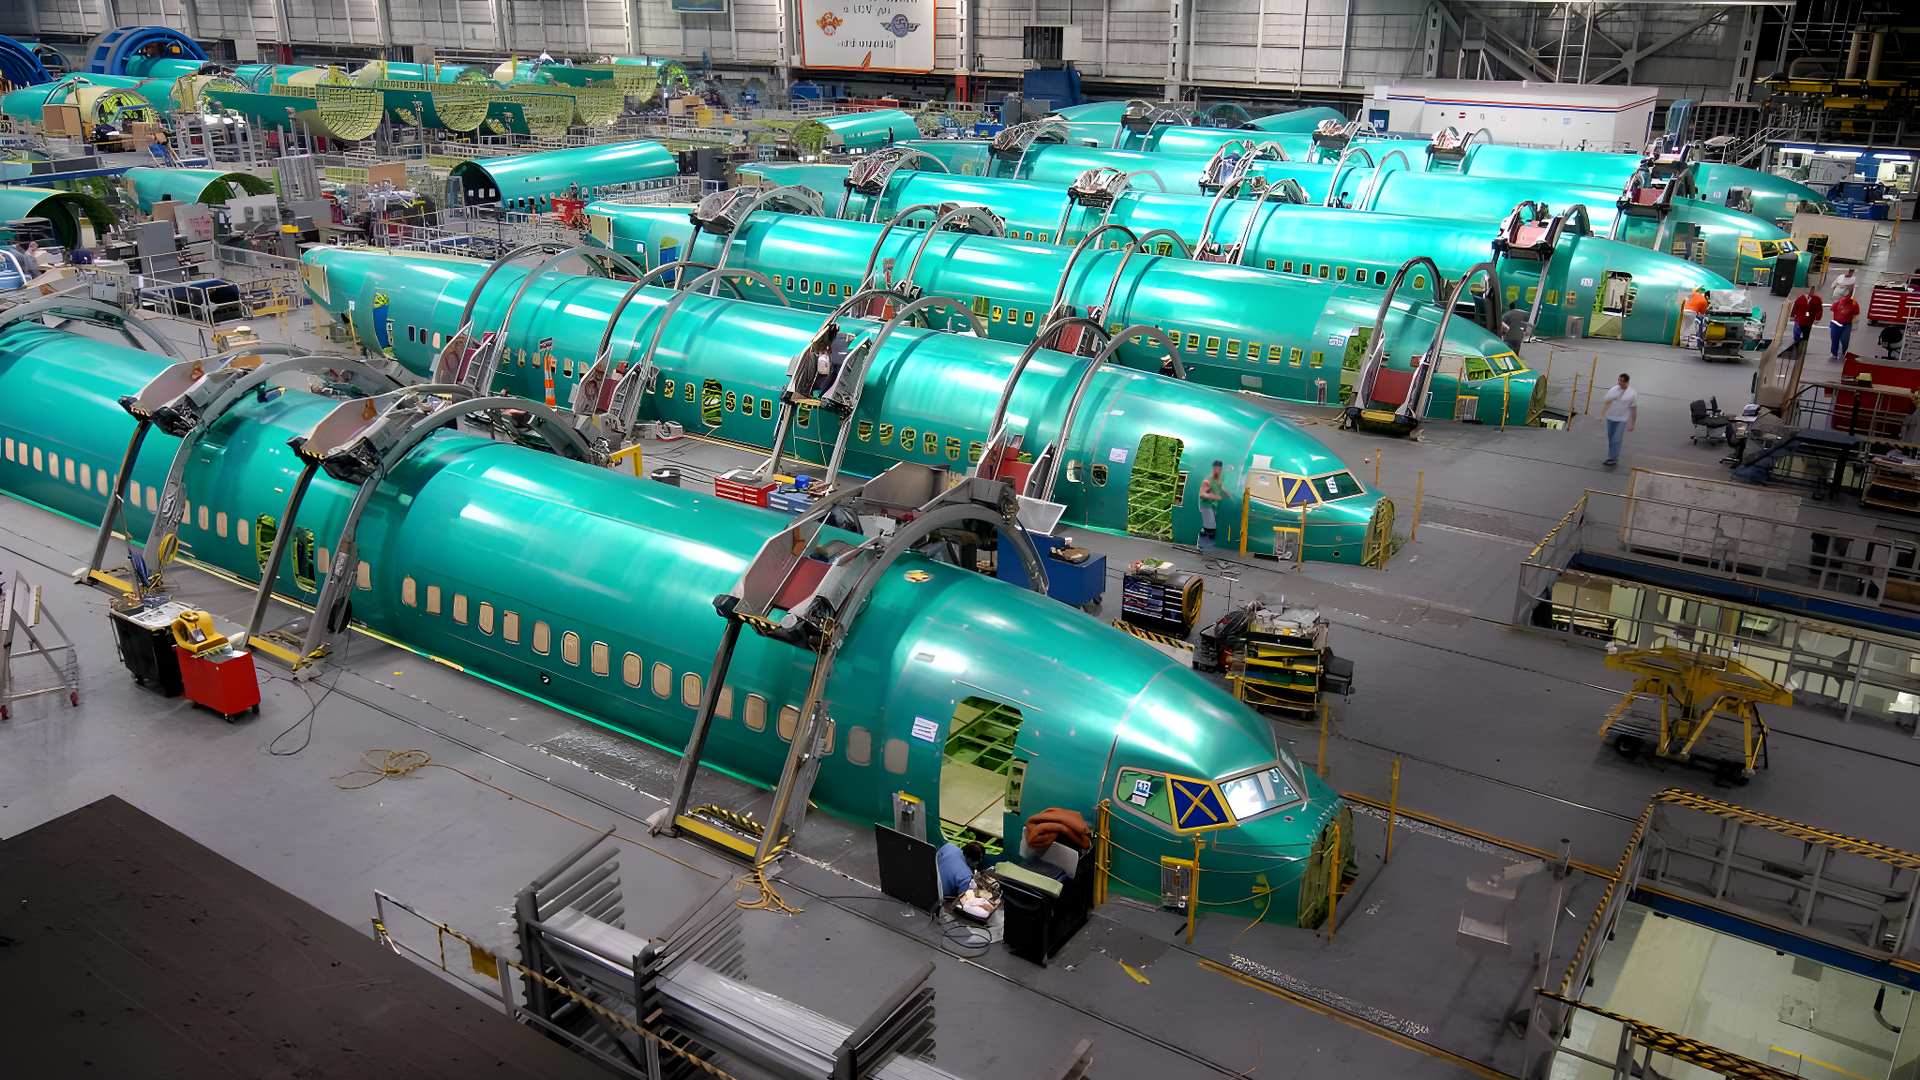 Spirit AeroSystems Gets Better Contract & Funding From Boeing